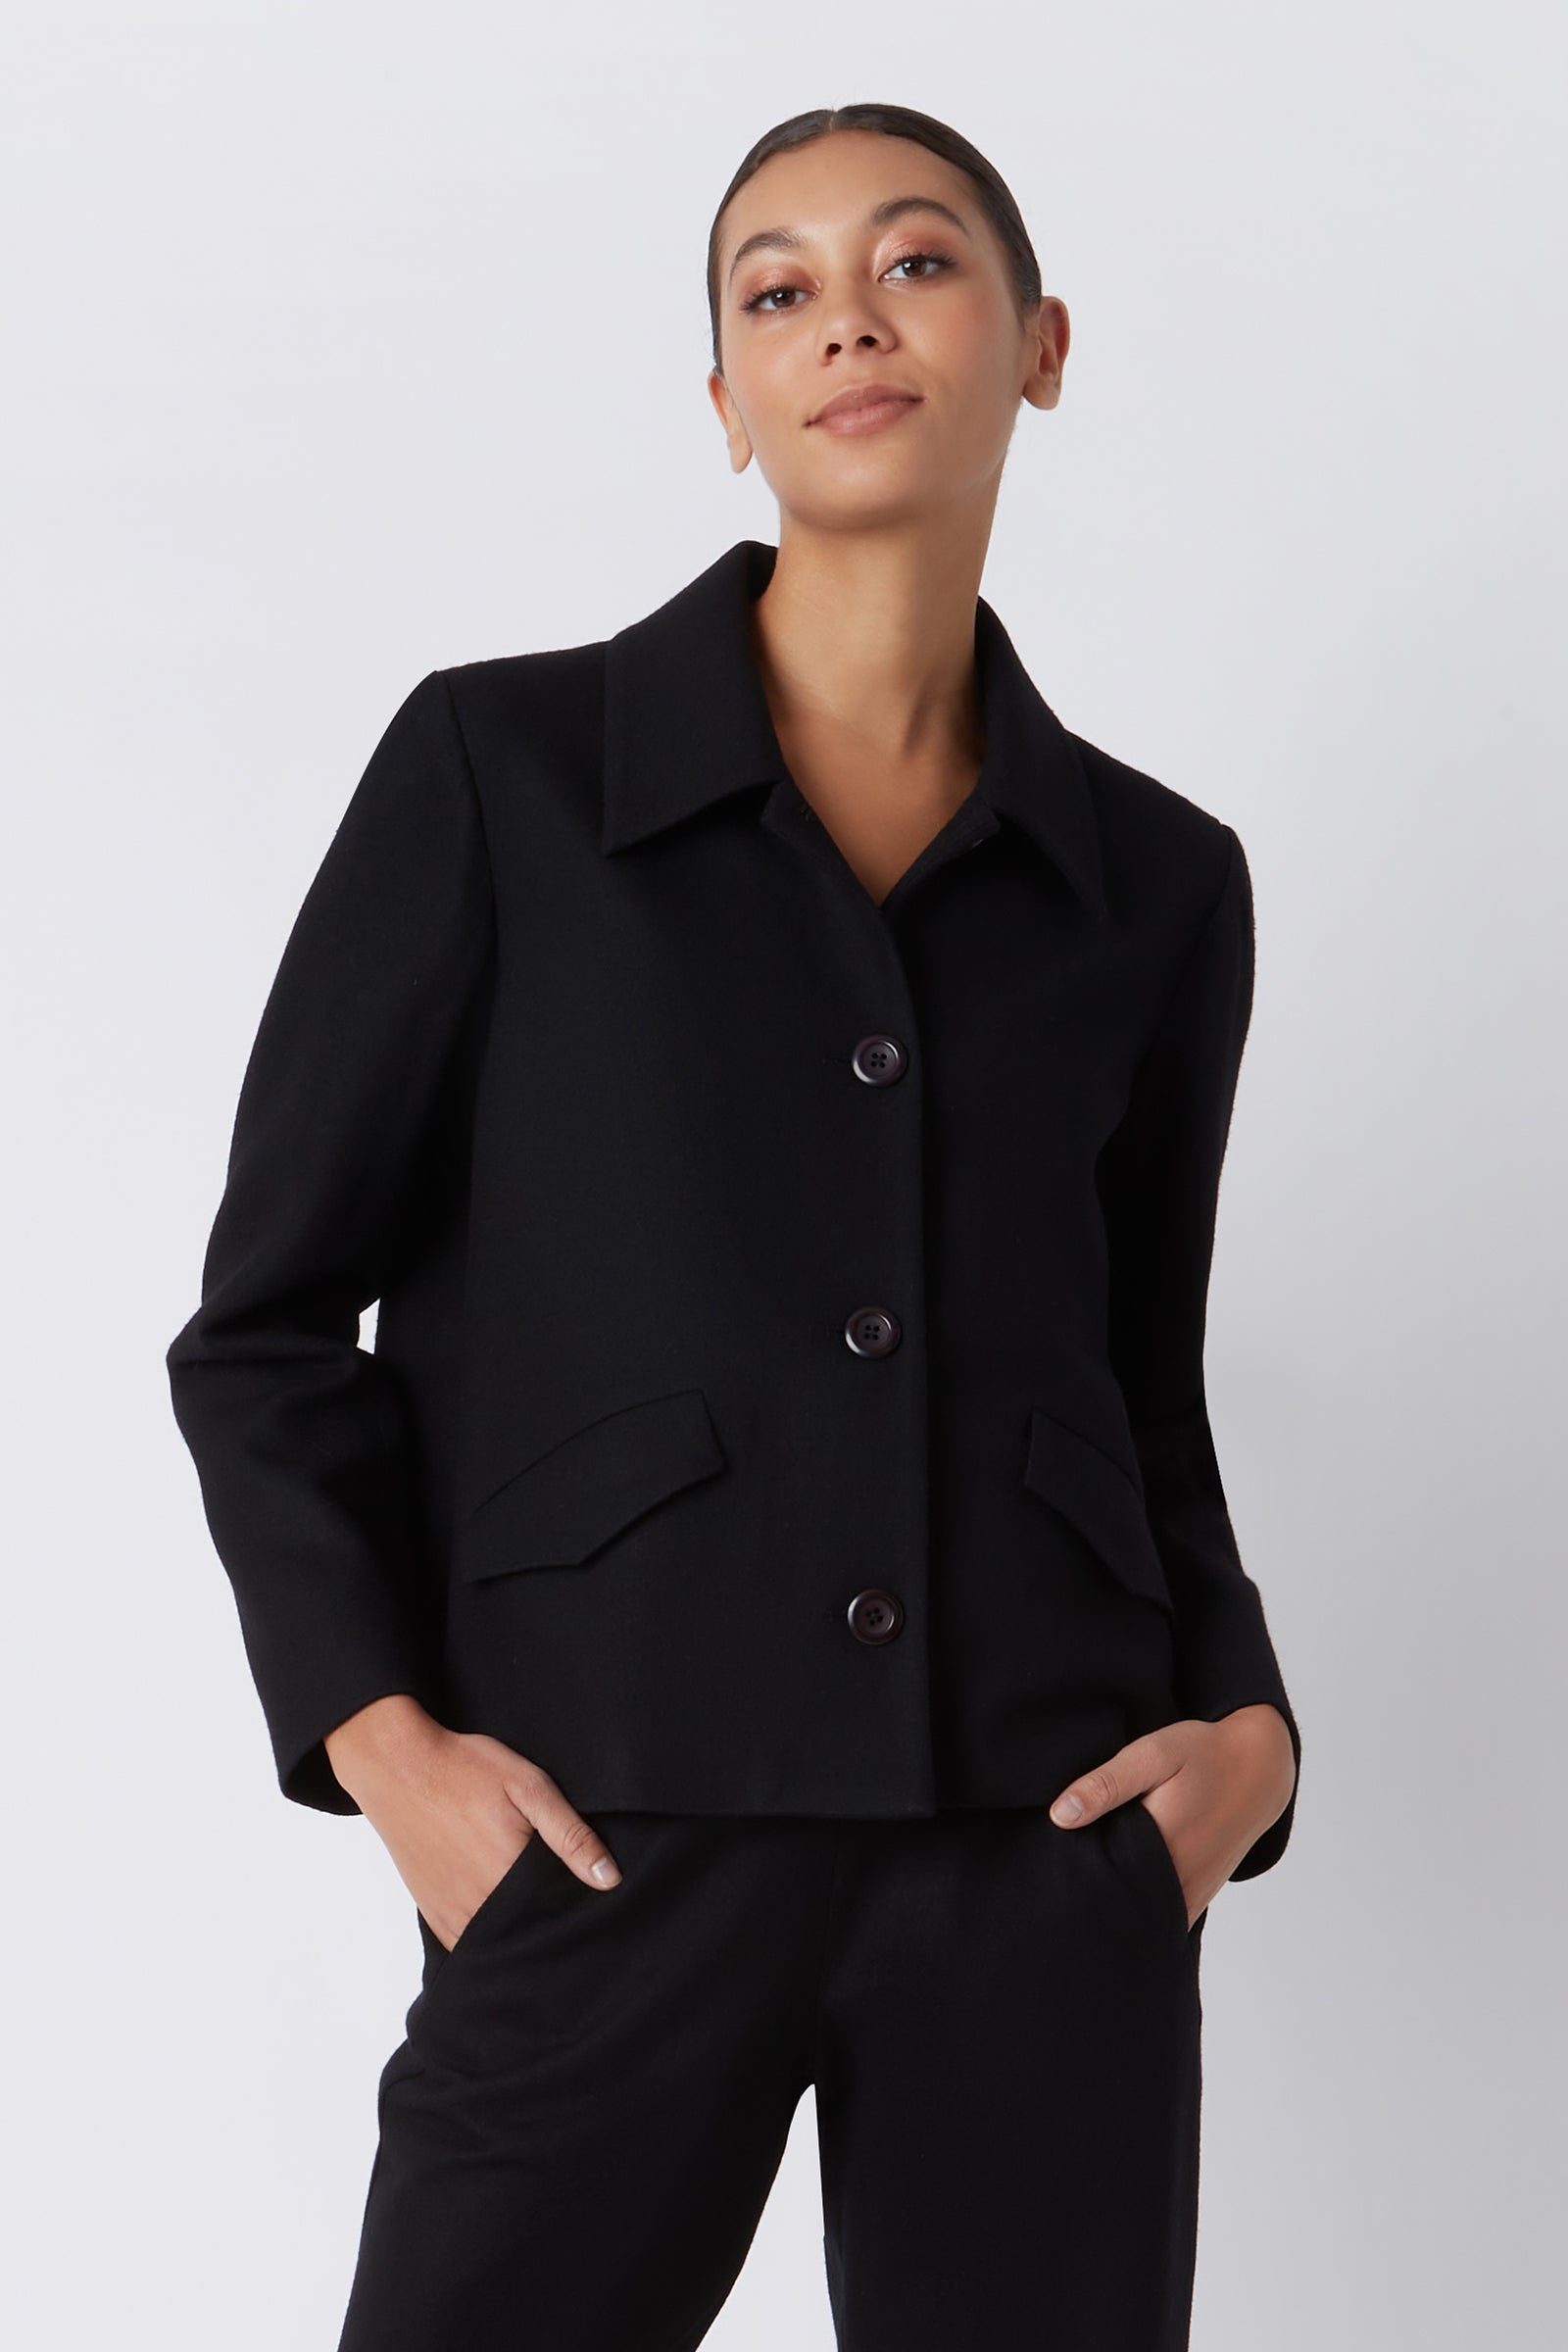 Kal Rieman Sylvie FJ Swing Jacket in Black Felted Jersey on Model with Hands in Pockets Cropped Front View